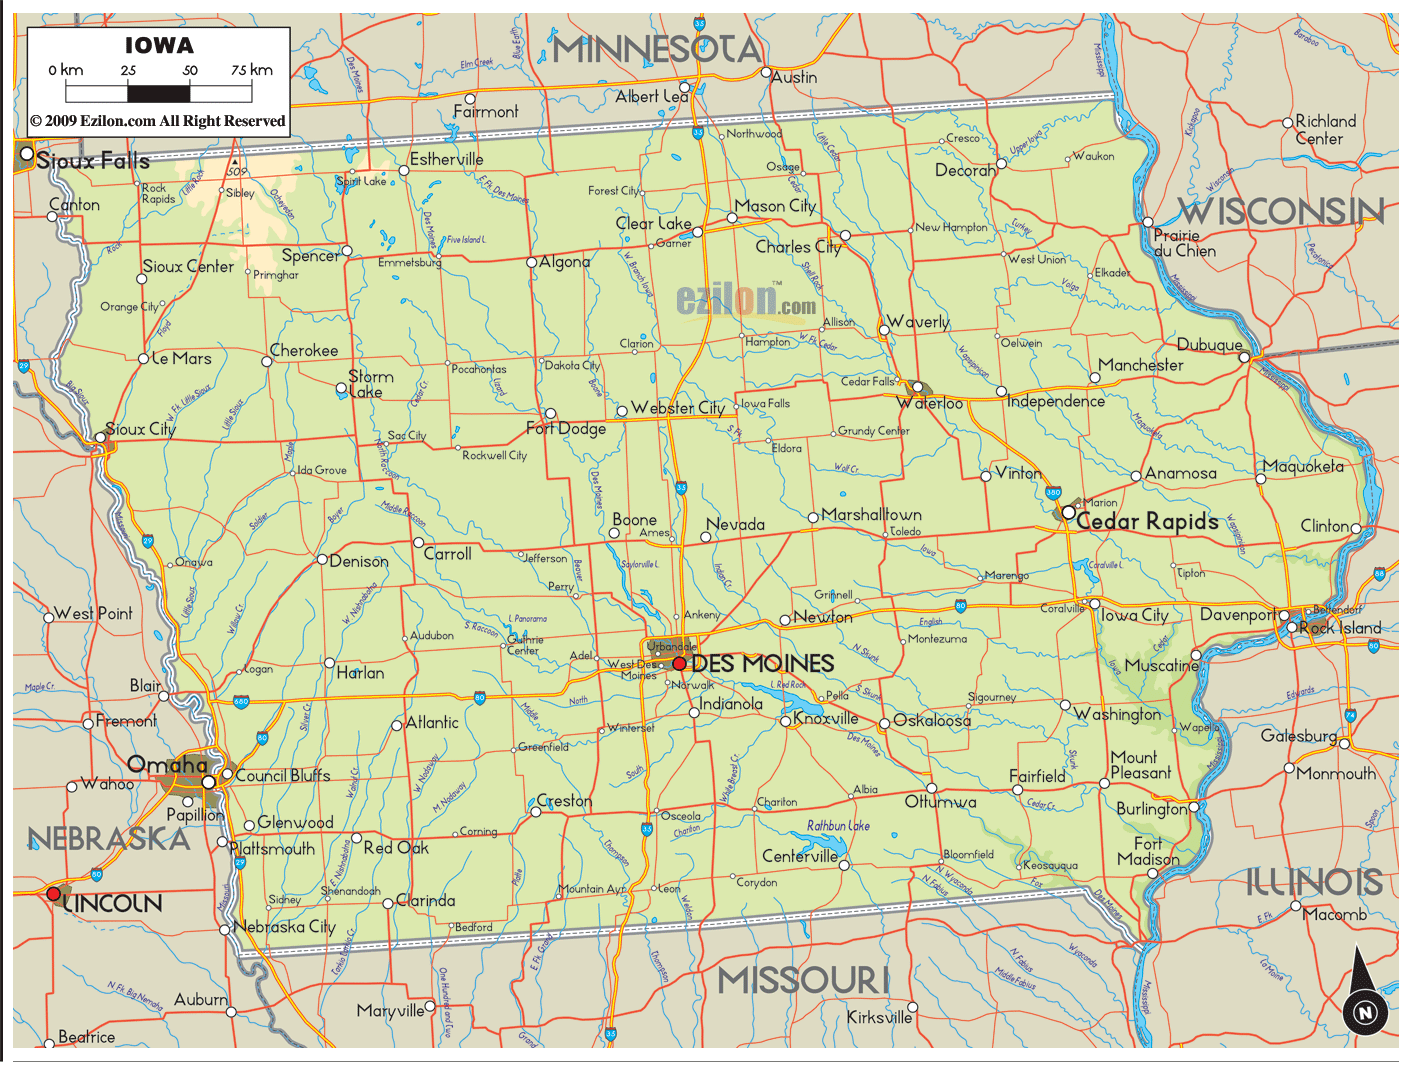 Physical map of Iowa State, USA showing major geographical features such as rivers, lakes, mountains, hills, topography and land formations.